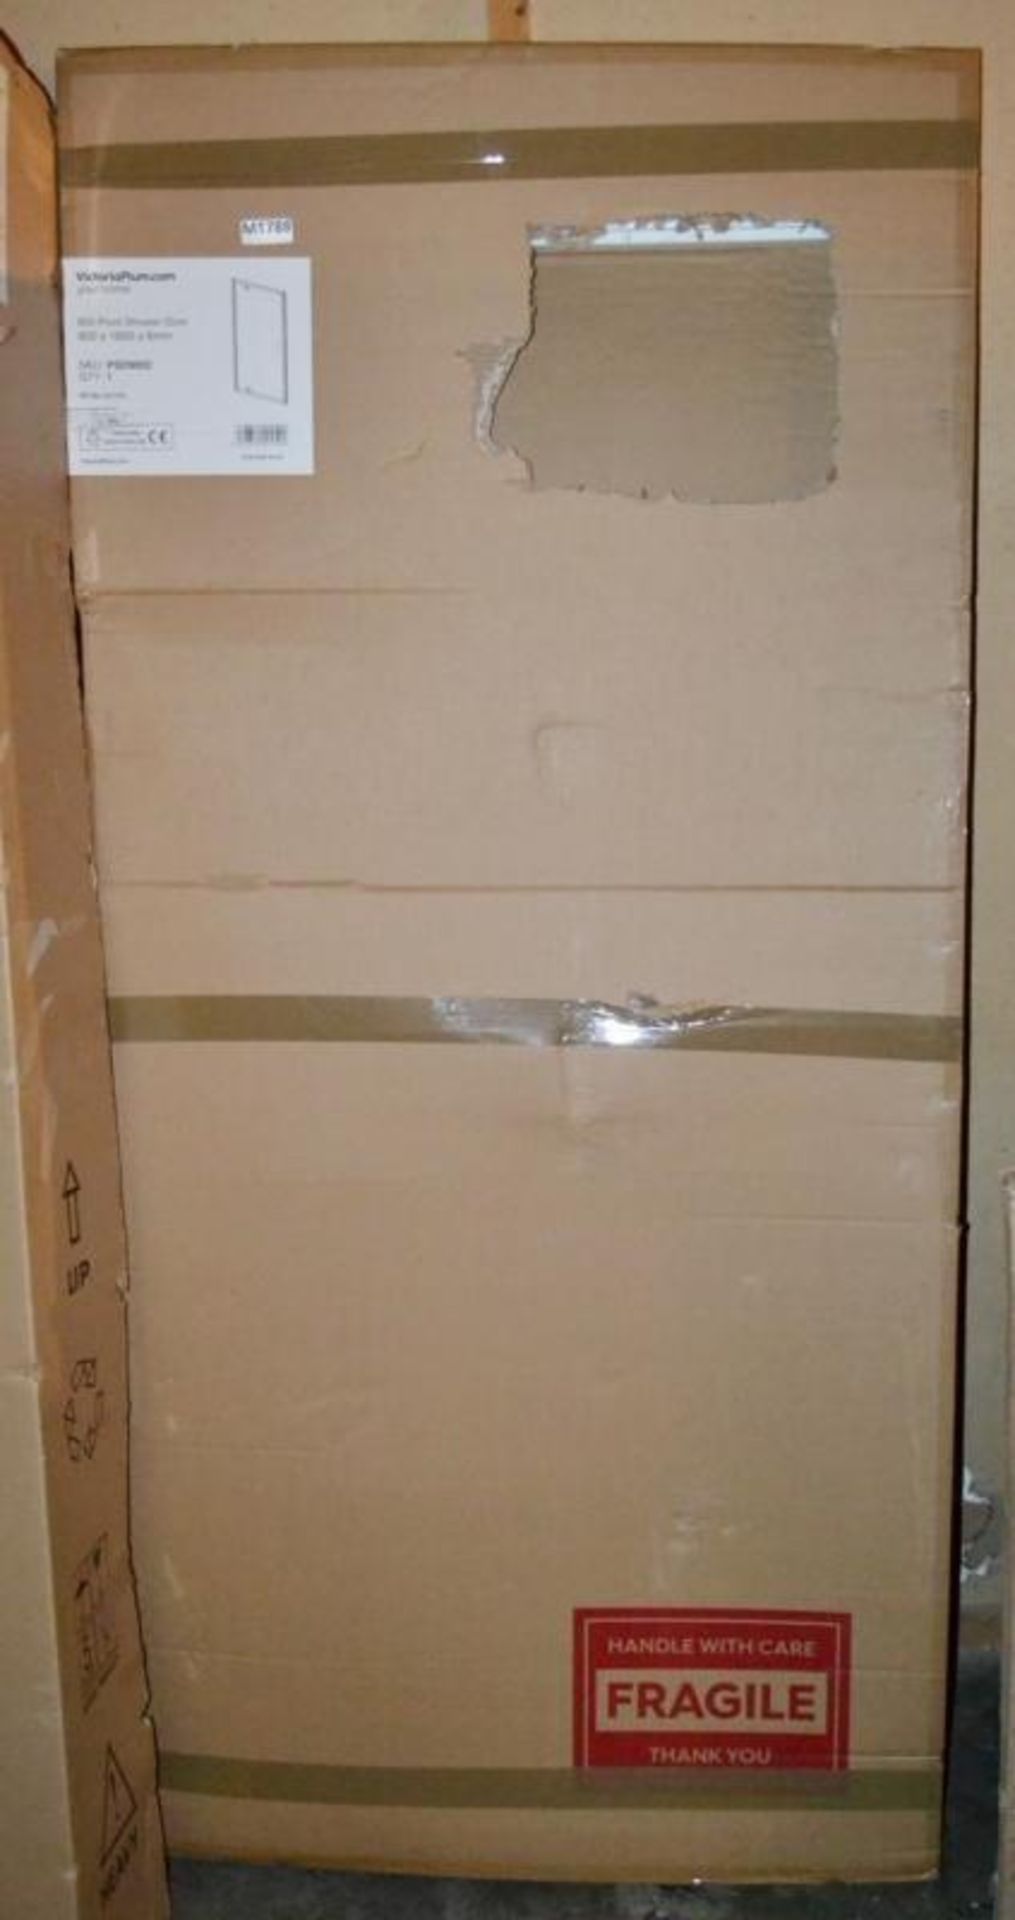 1 x 900 Pivot Shower Door (PSD9002) - Unused Boxed Stock - Dimensions: 900 x 1850 x 6mm - CL269 - Re